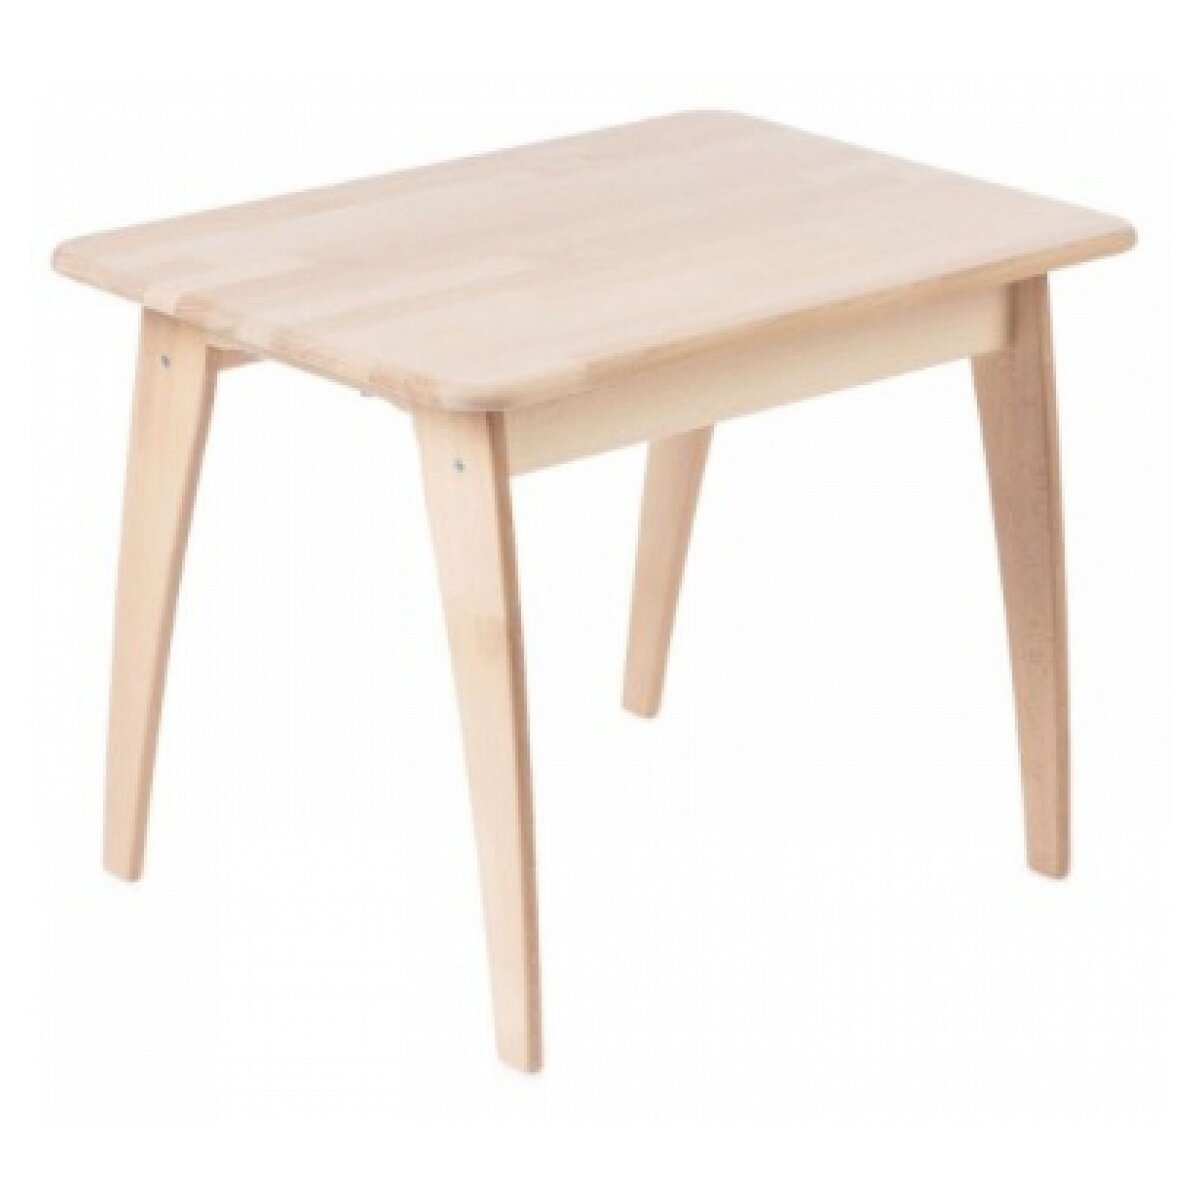 GEUTHER Table bois enfant BAMBINO